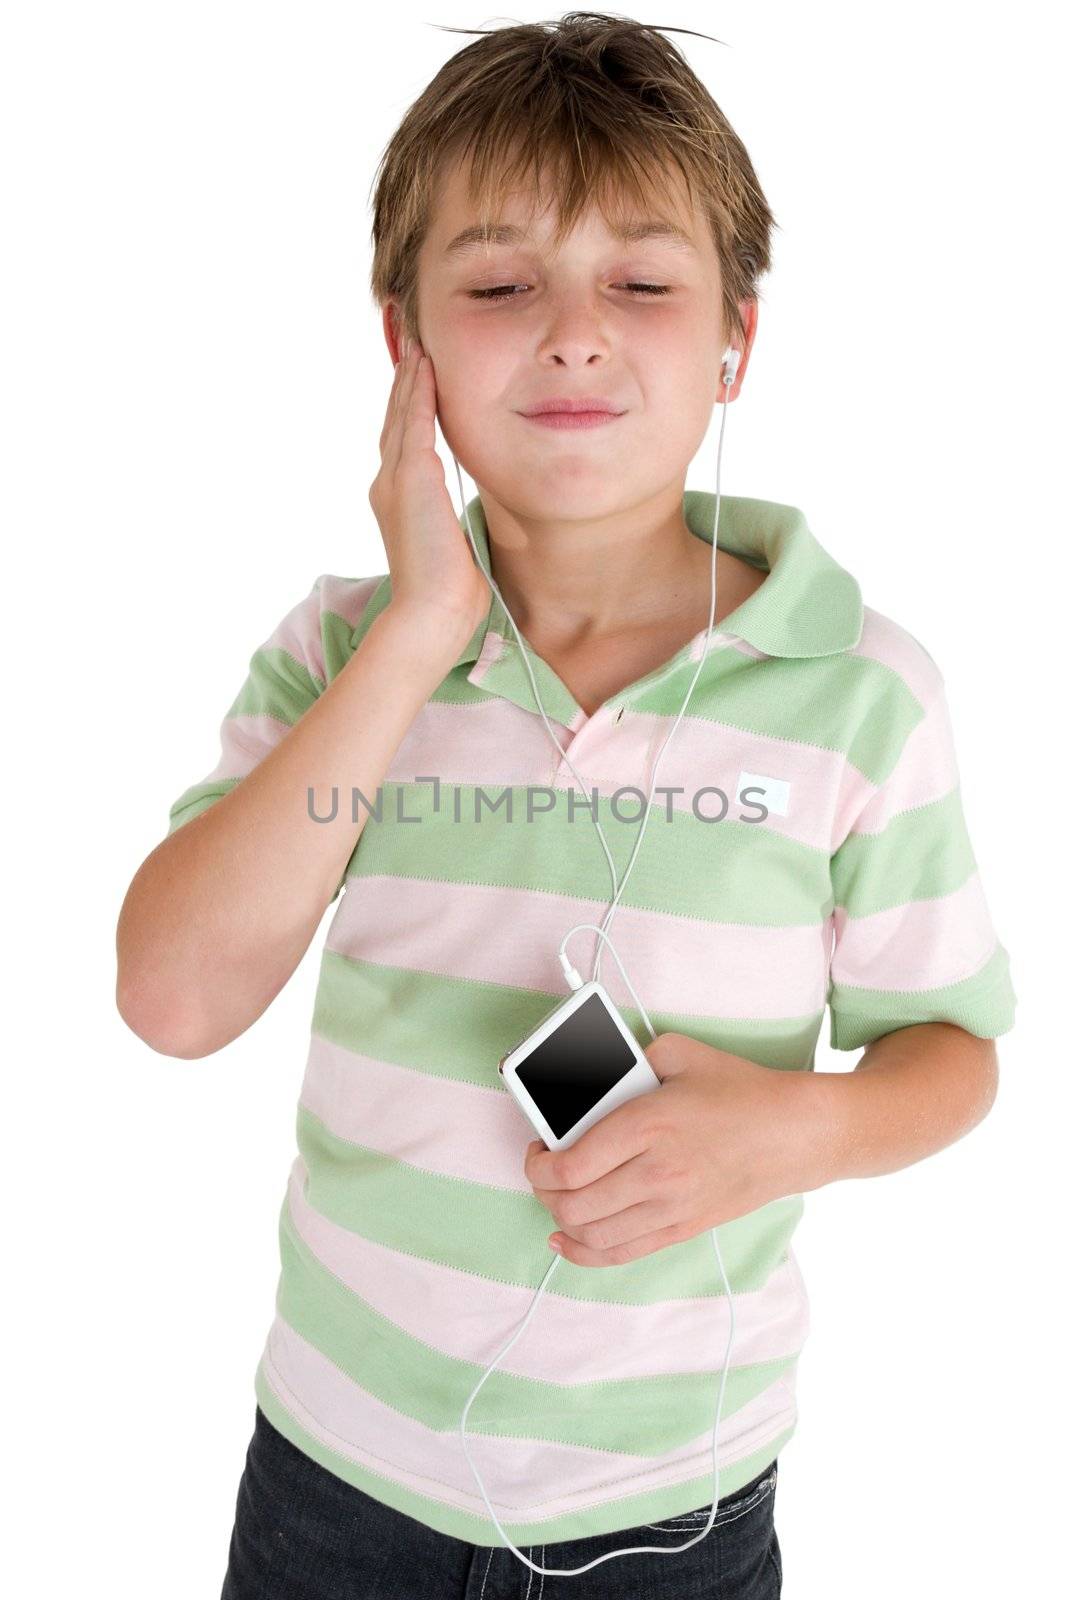 A child enjoys music from a portable player.